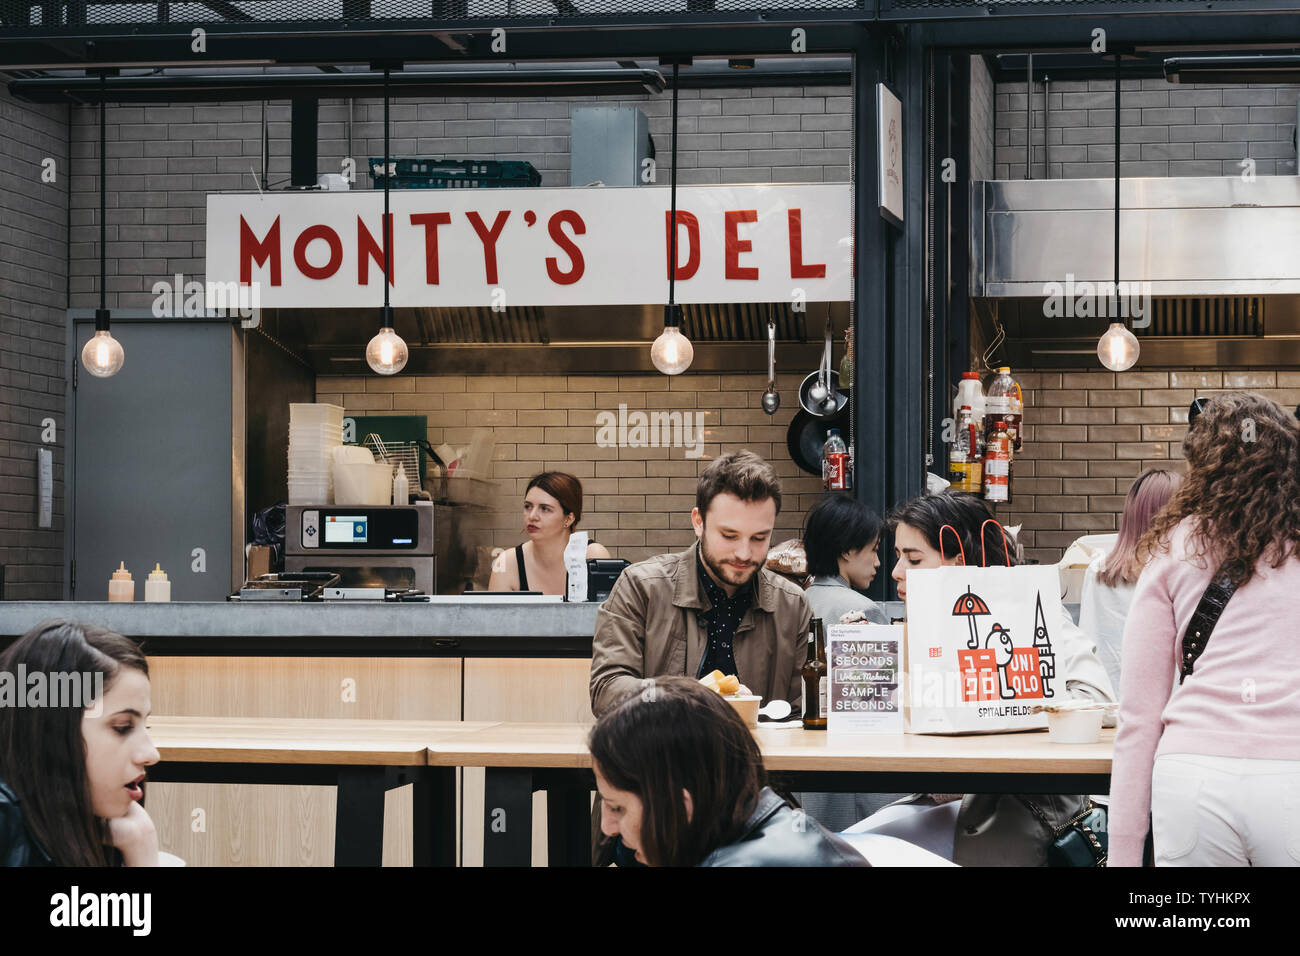 London, UK - June 15, 2019: People enjoying in front of Montys NYC style deli stand at Spitalfields Market, one of the finest Market Halls in London w Stock Photo